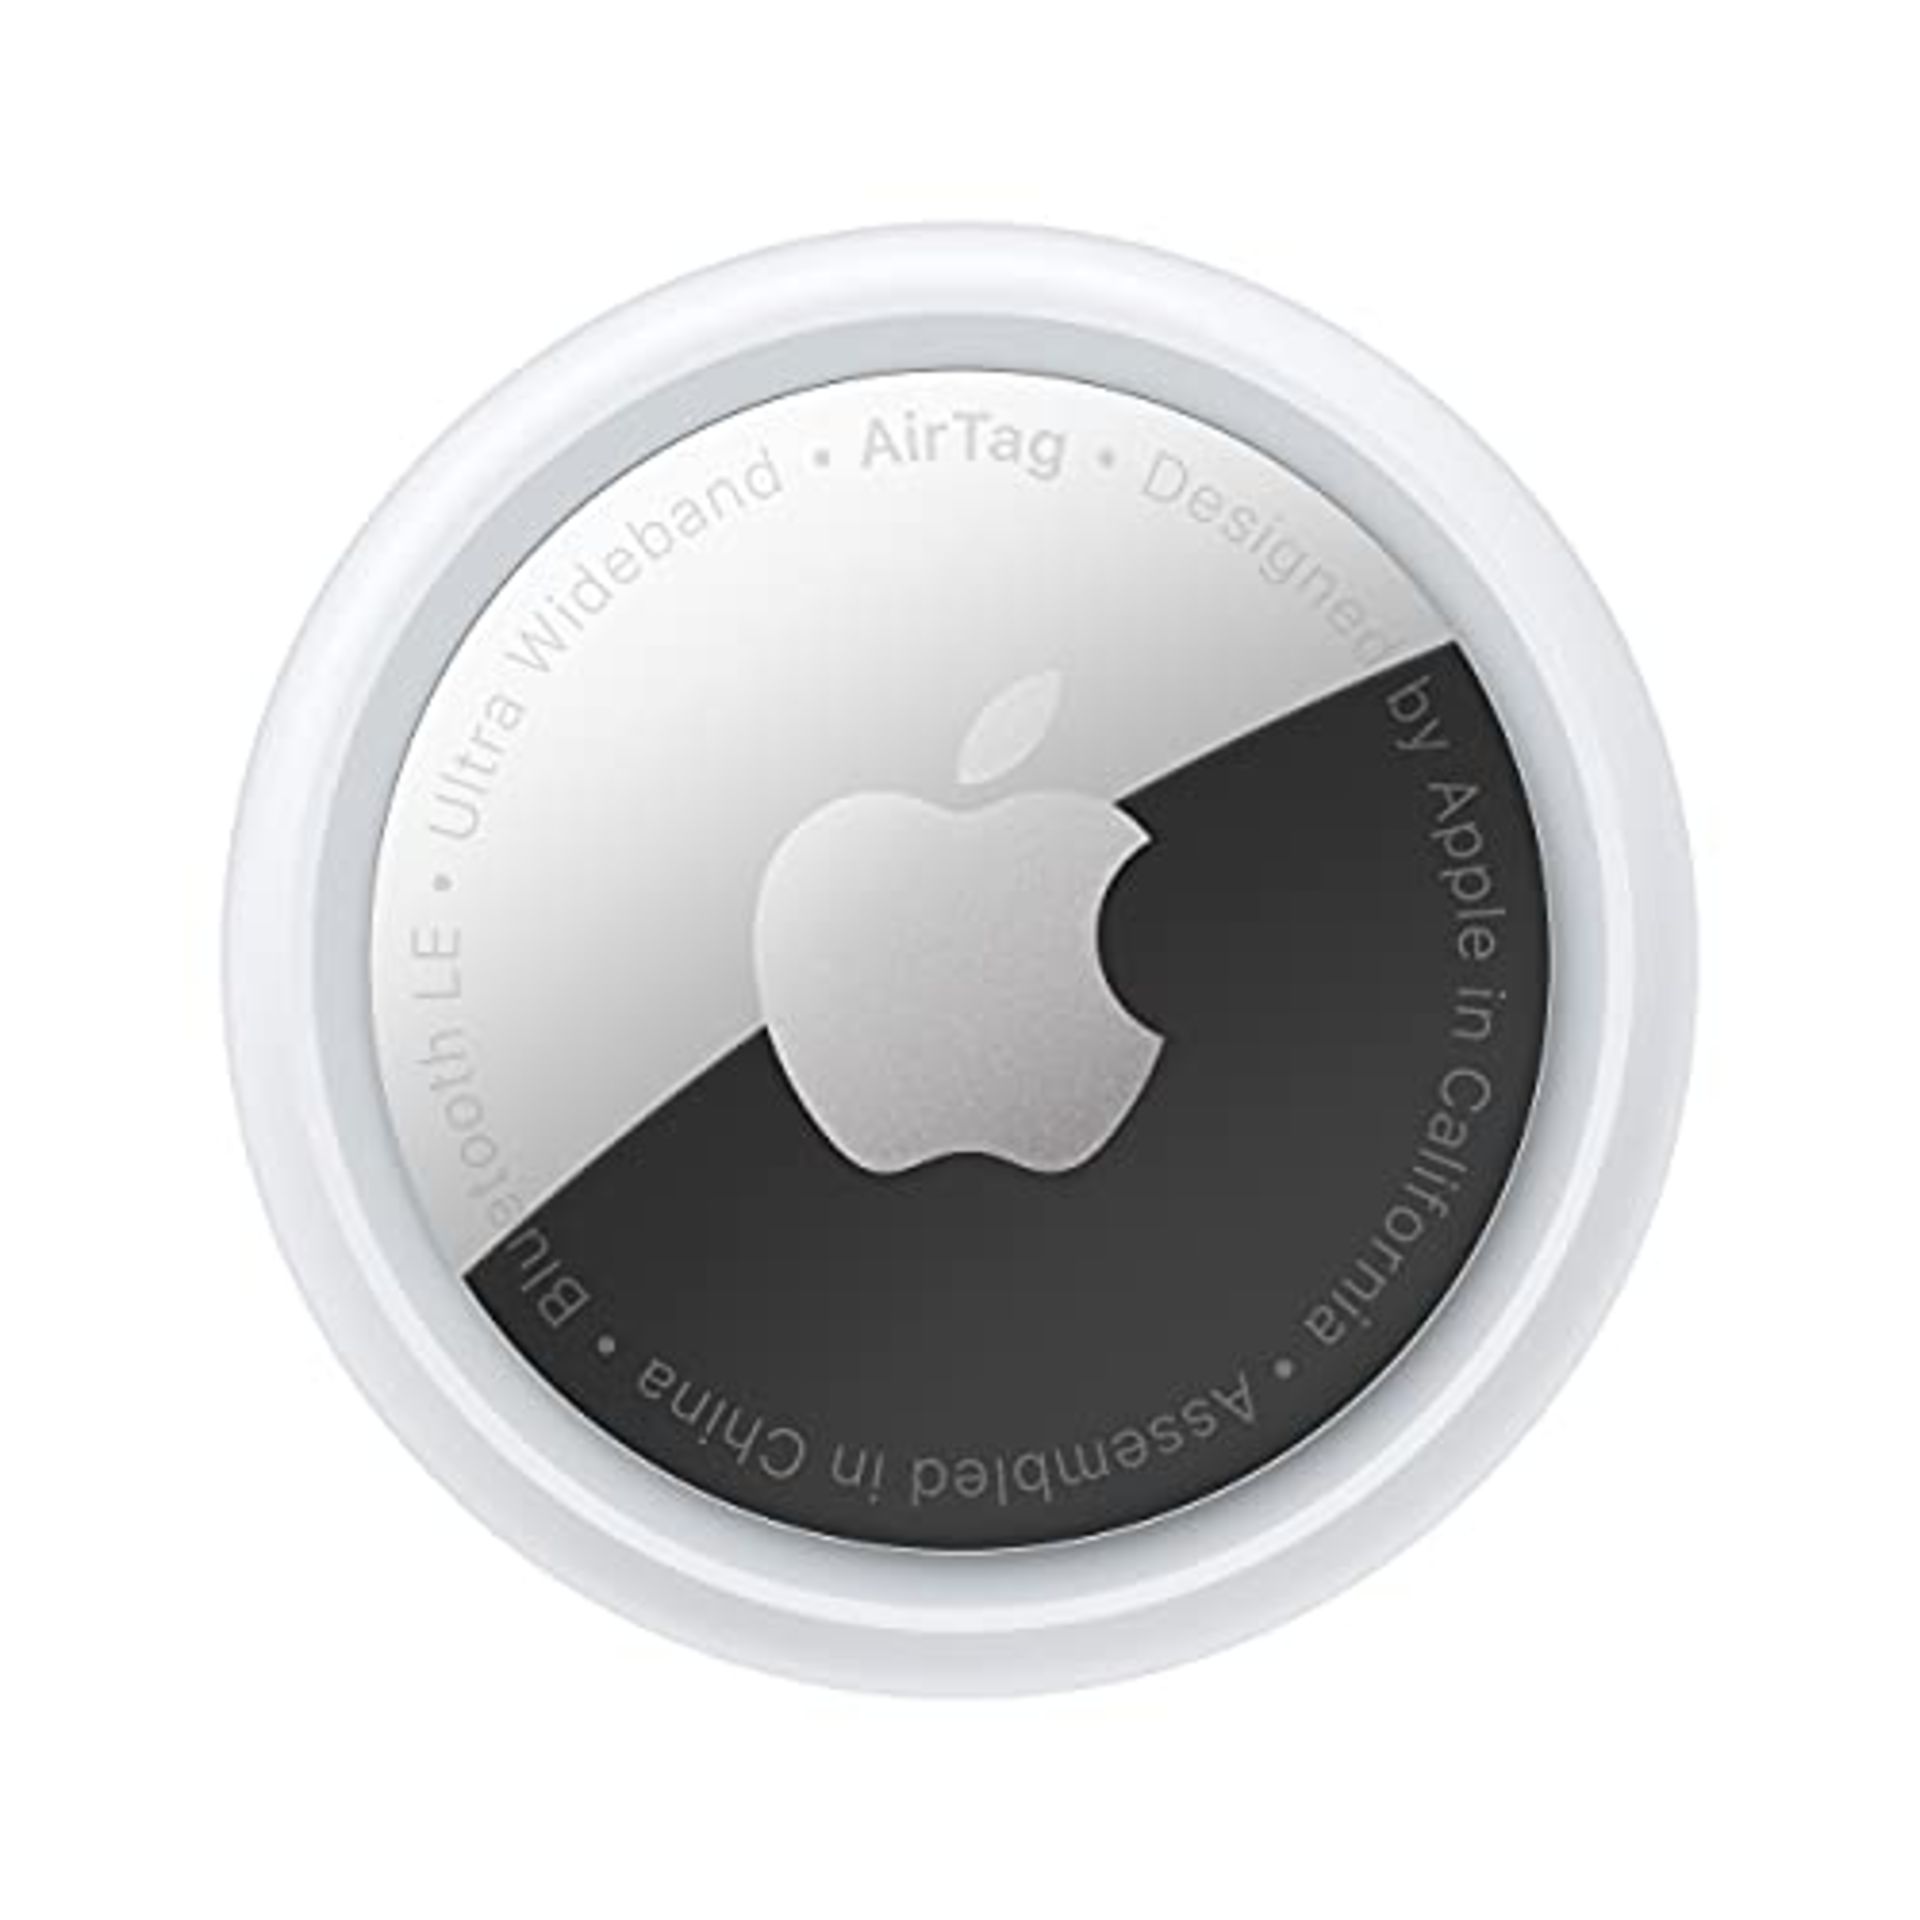 Apple AirTag - Image 4 of 6